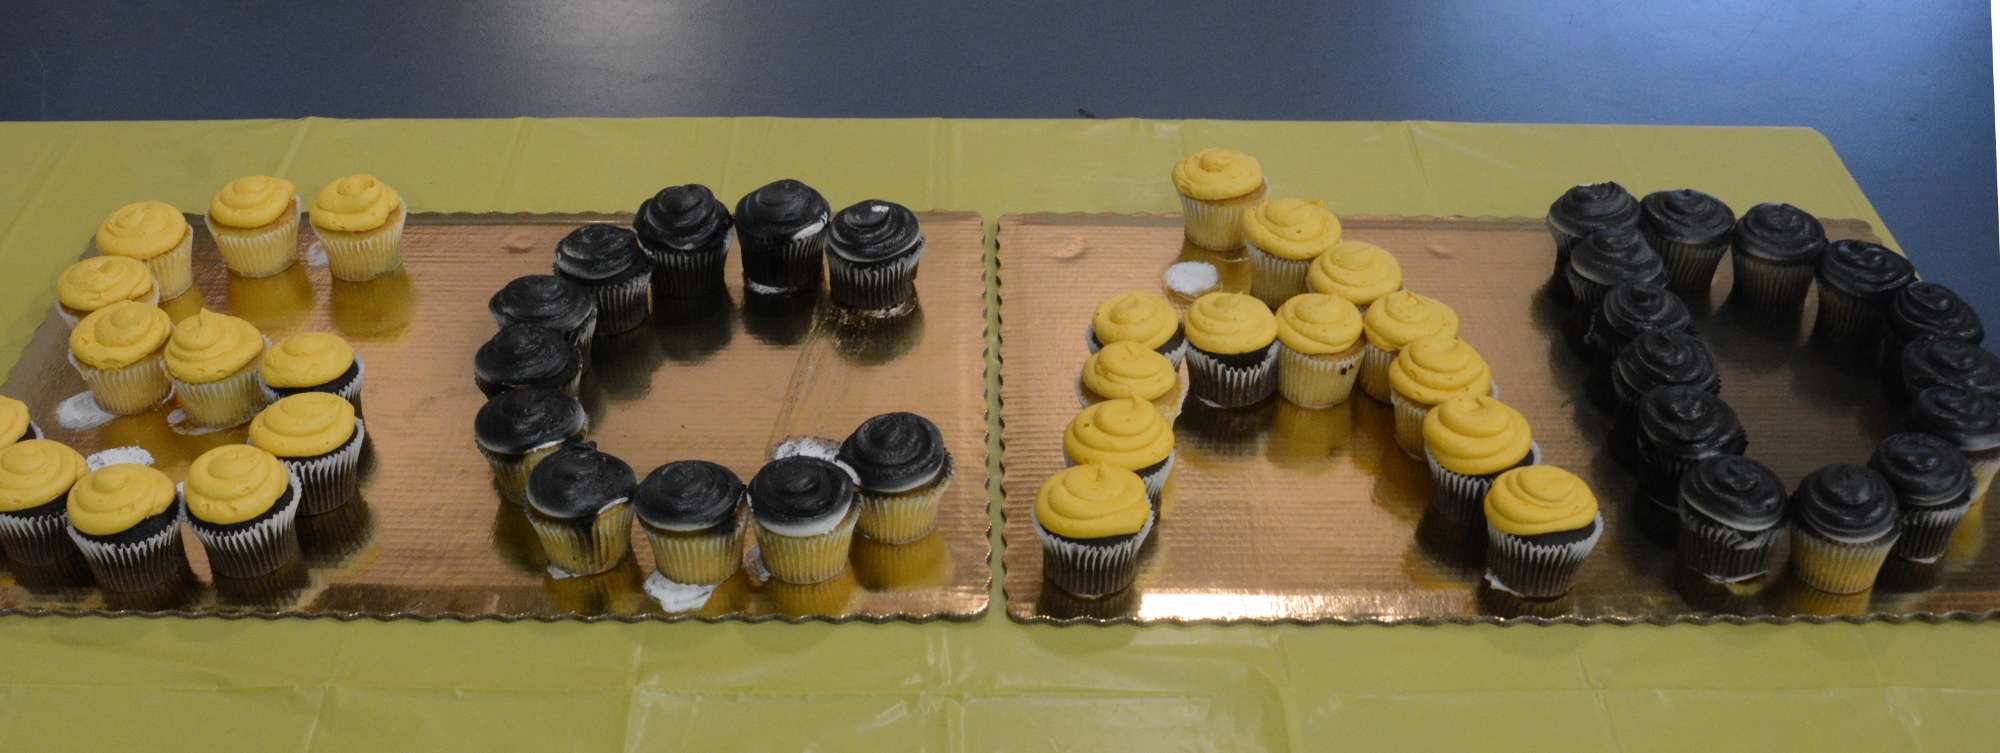 SCAD is written out in cupcakes for Foshee's school of choice, the Savannah College of Art and Design.